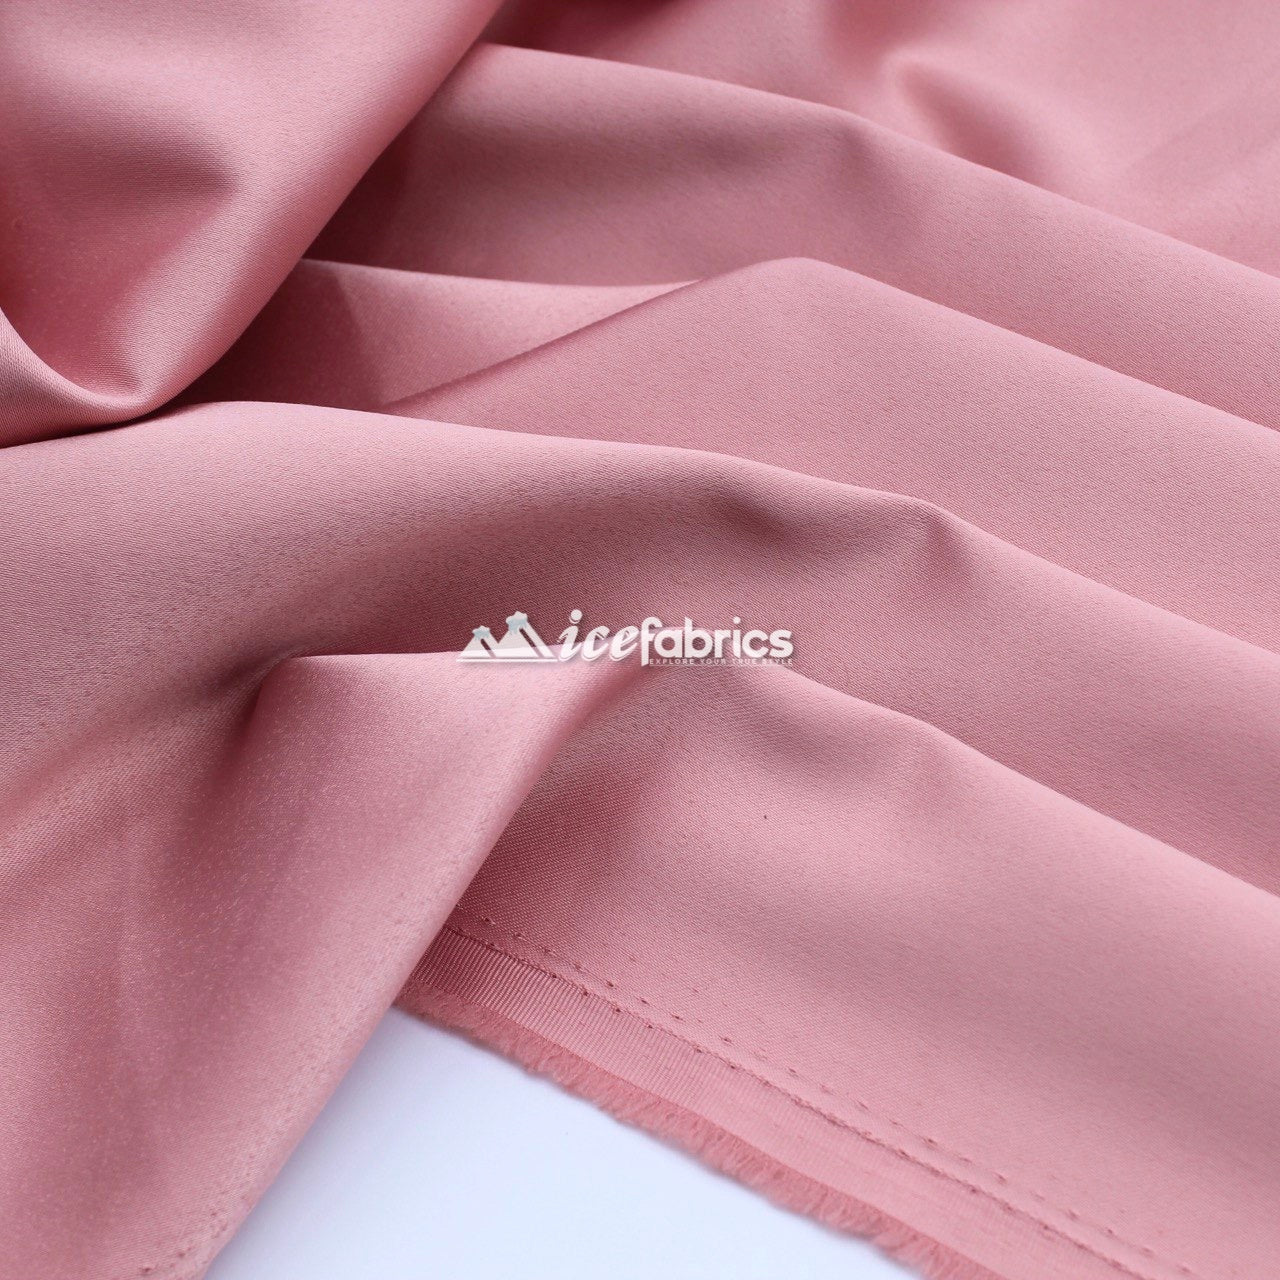 Armani Thick Solid Color Silky Stretch Satin Fabric Sold By The YardSatin FabricICE FABRICSICE FABRICSDusty RoseArmani Thick Solid Color Silky Stretch Satin Fabric Sold By The Yard ICE FABRICS Mauve